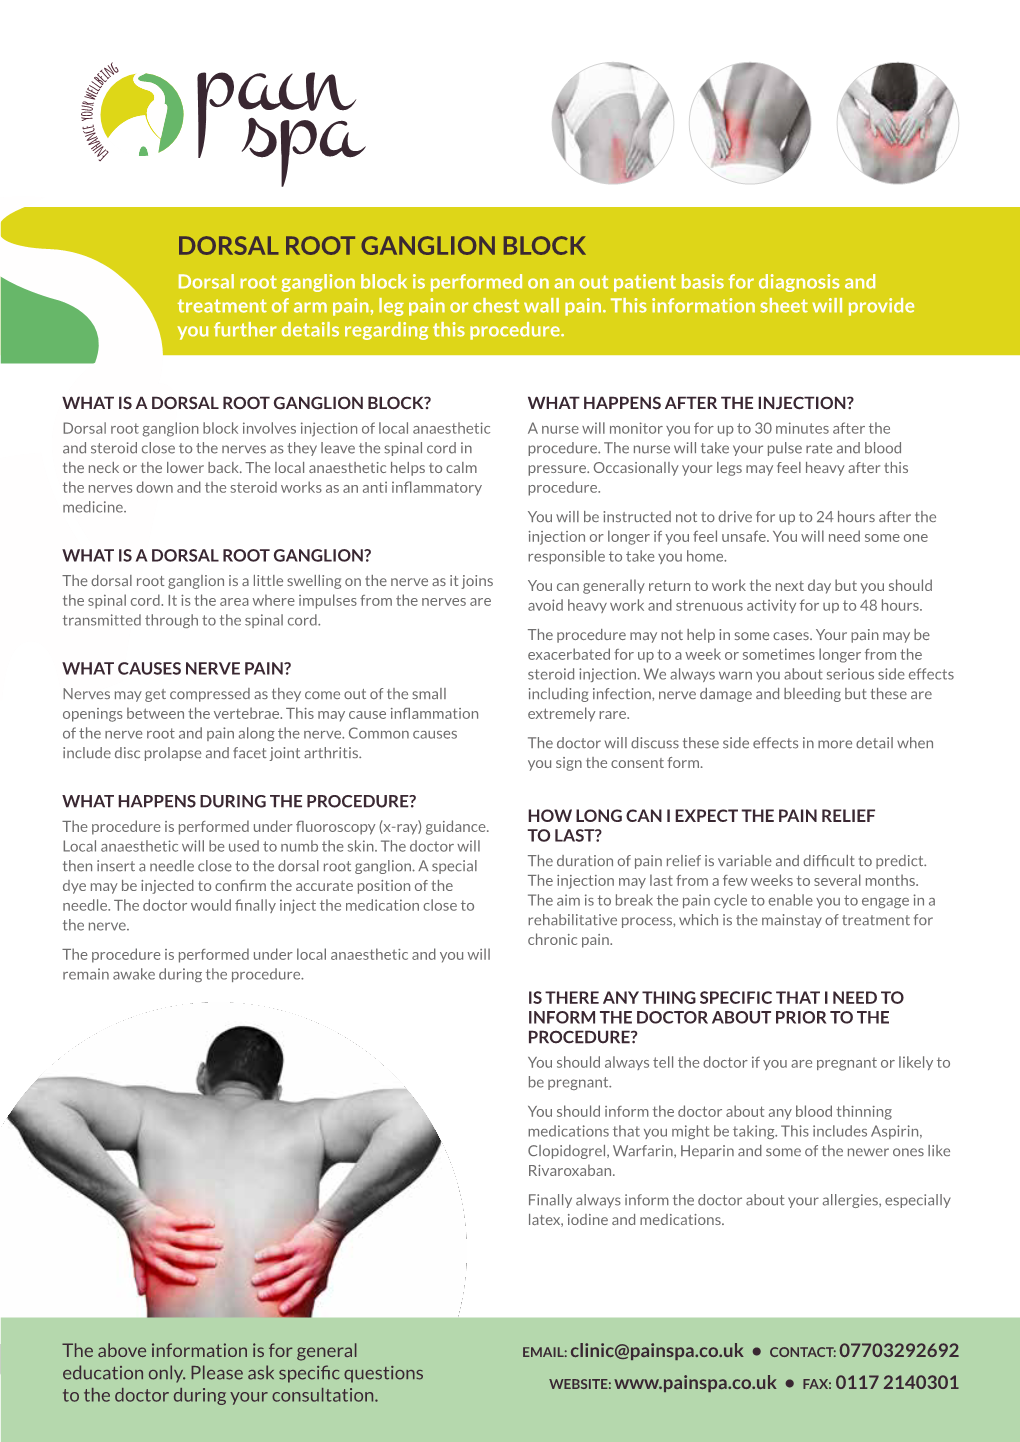 DORSAL ROOT GANGLION BLOCK Dorsal Root Ganglion Block Is Performed on an out Patient Basis for Diagnosis and Treatment of Arm Pain, Leg Pain Or Chest Wall Pain